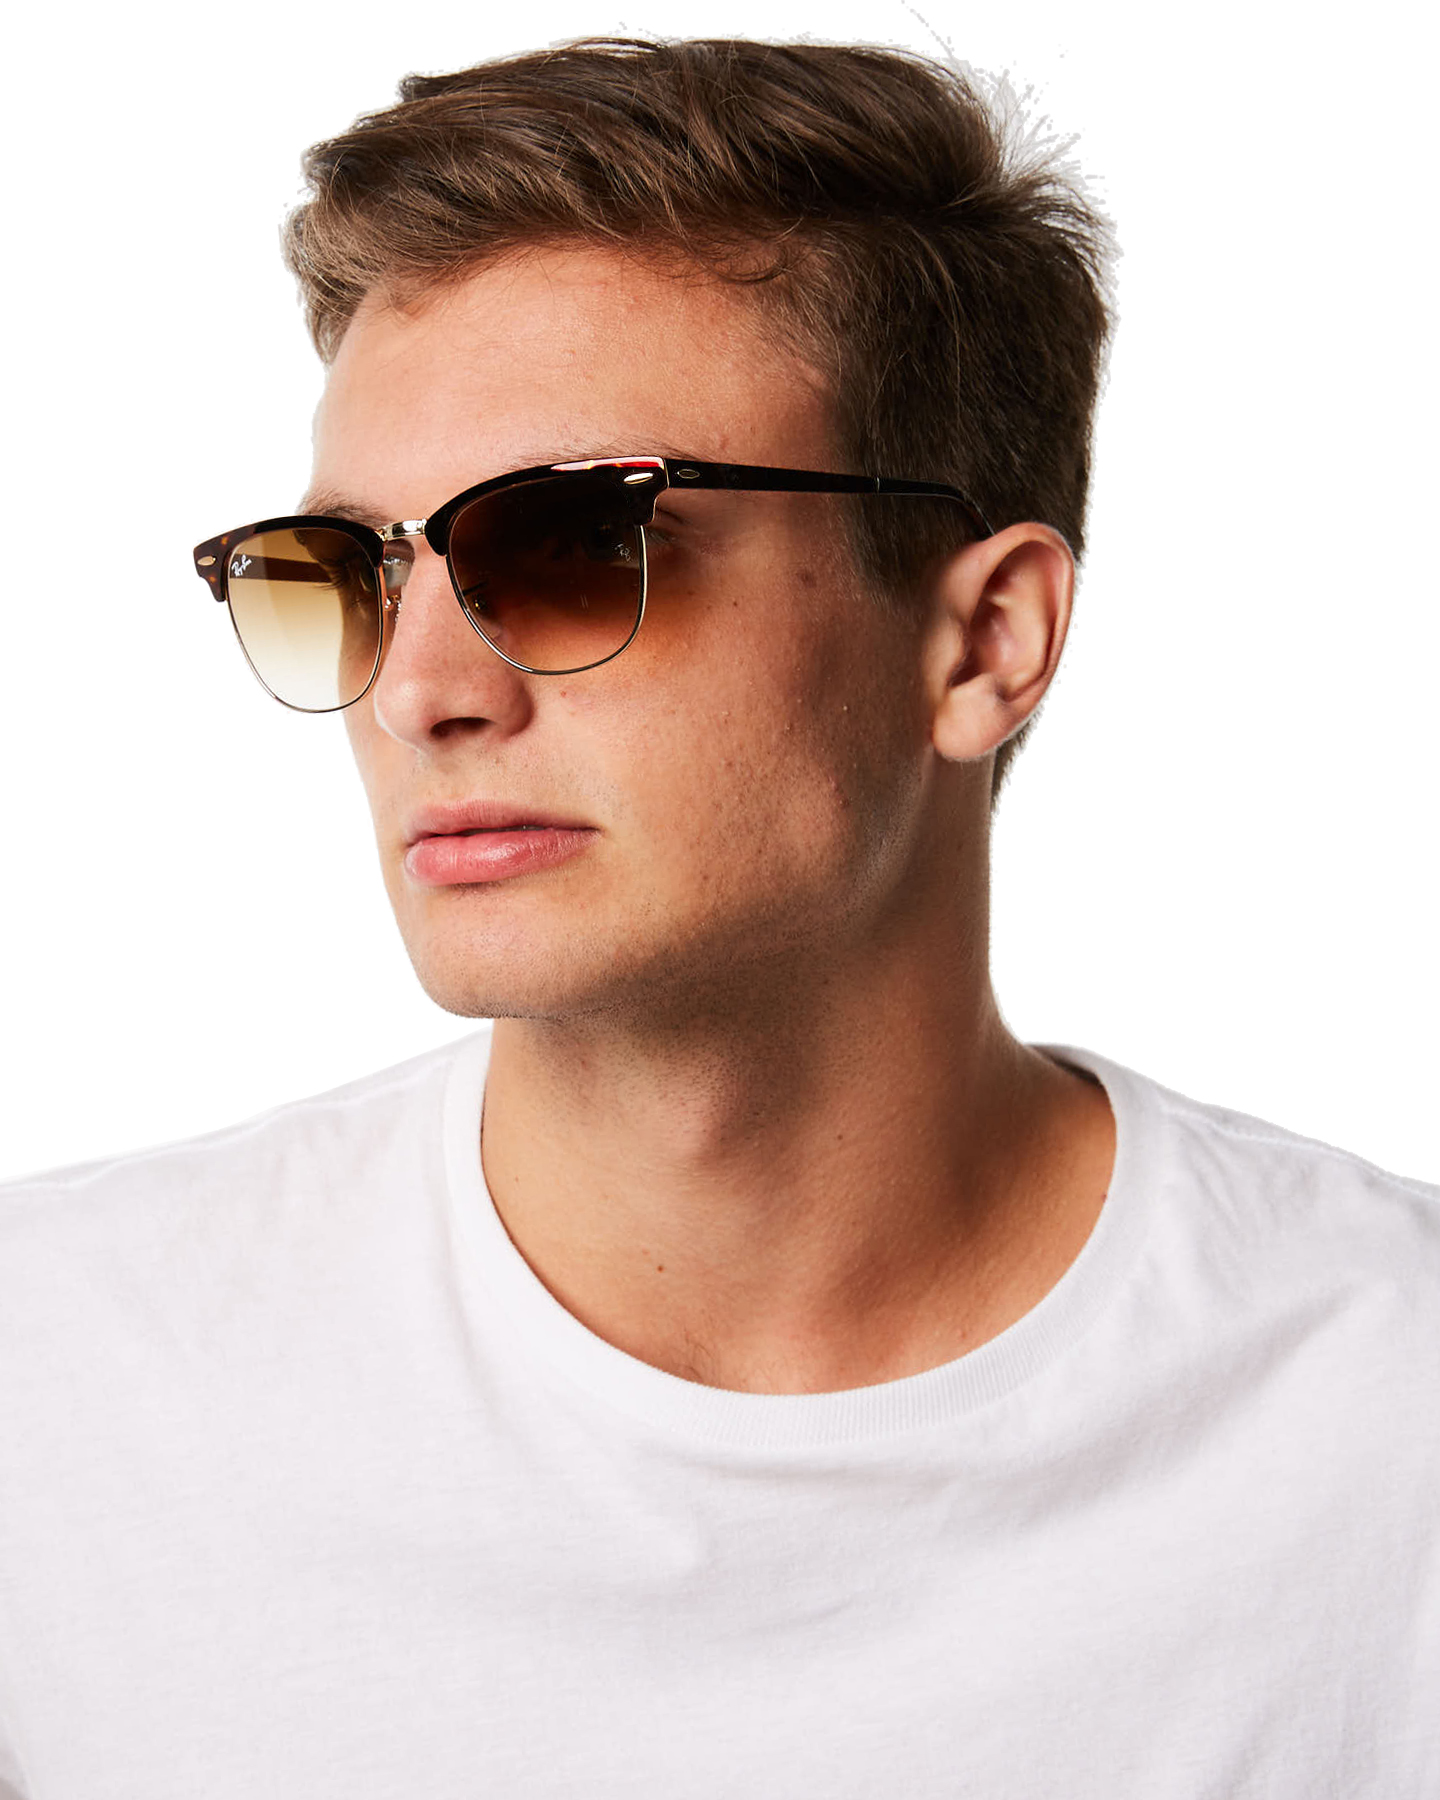 Ray-Ban Clubmaster Flat Metal Sunglasses - Gold Top Havana | SurfStitch